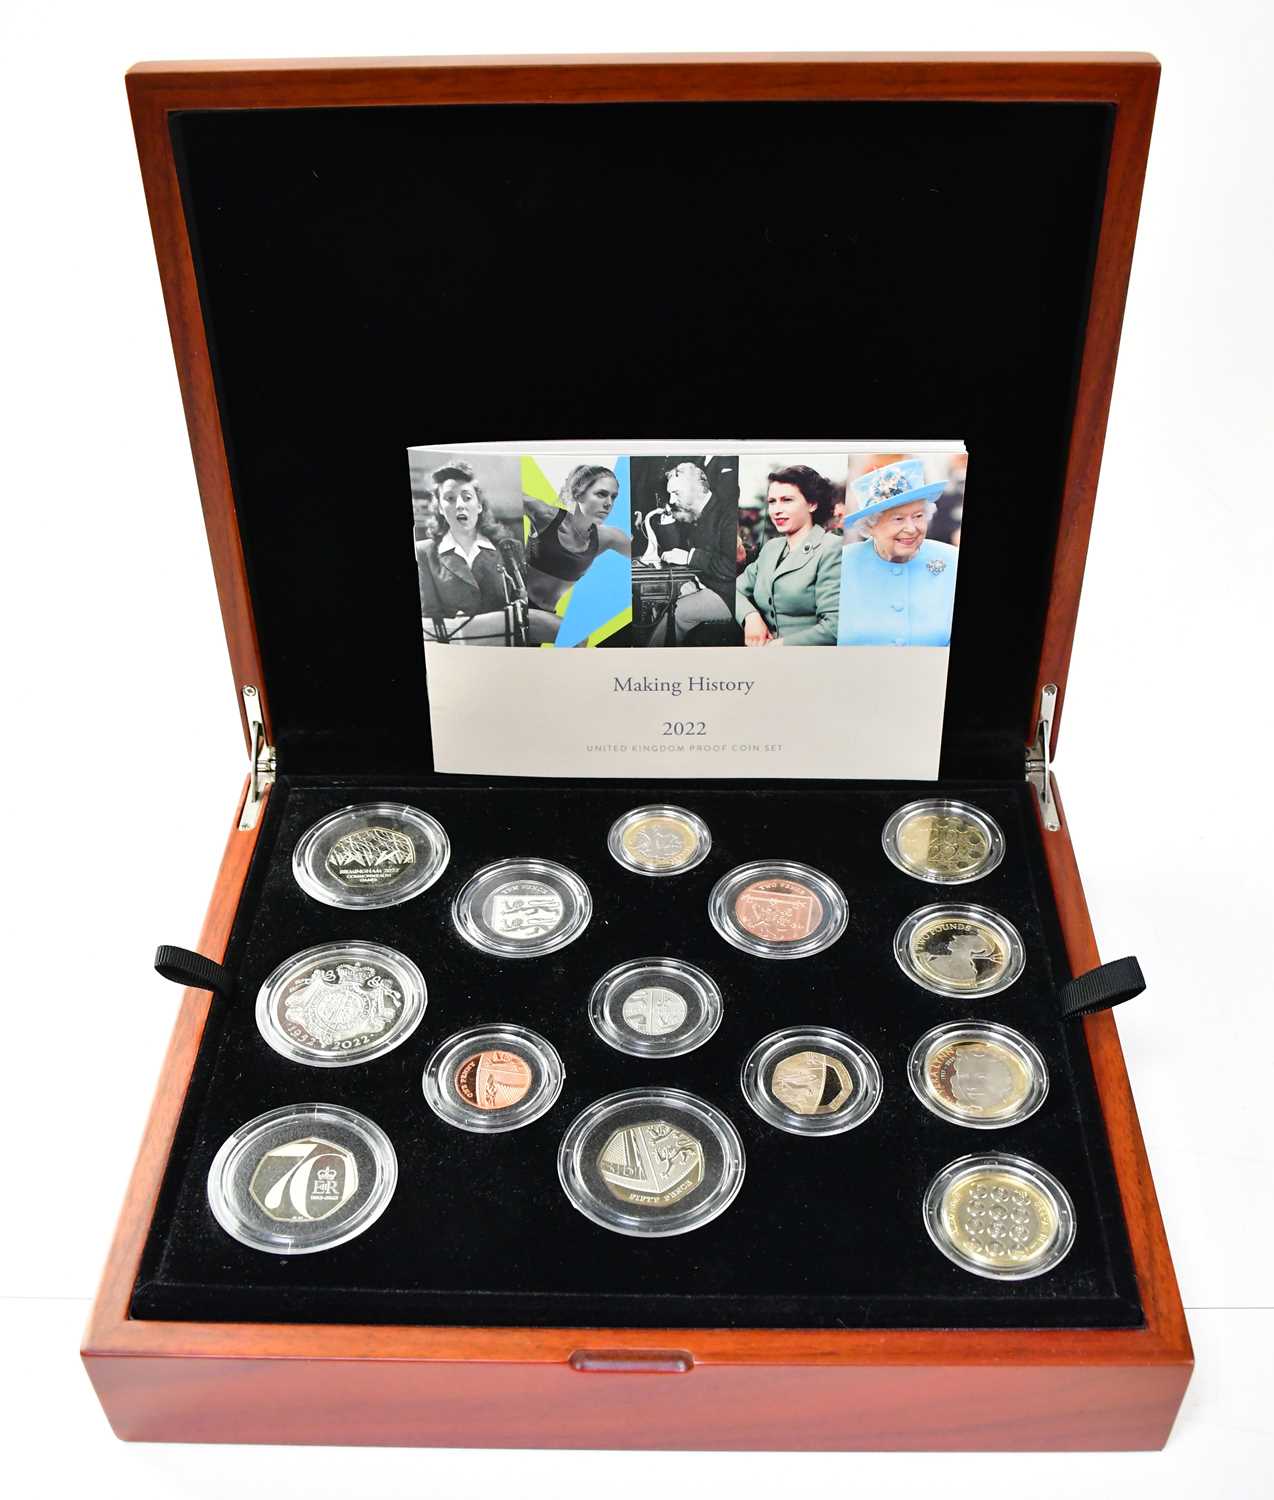 THE ROYAL MINT; 'Making History: The 2022 United Kingdom Premium Proof Coin Set', comprising